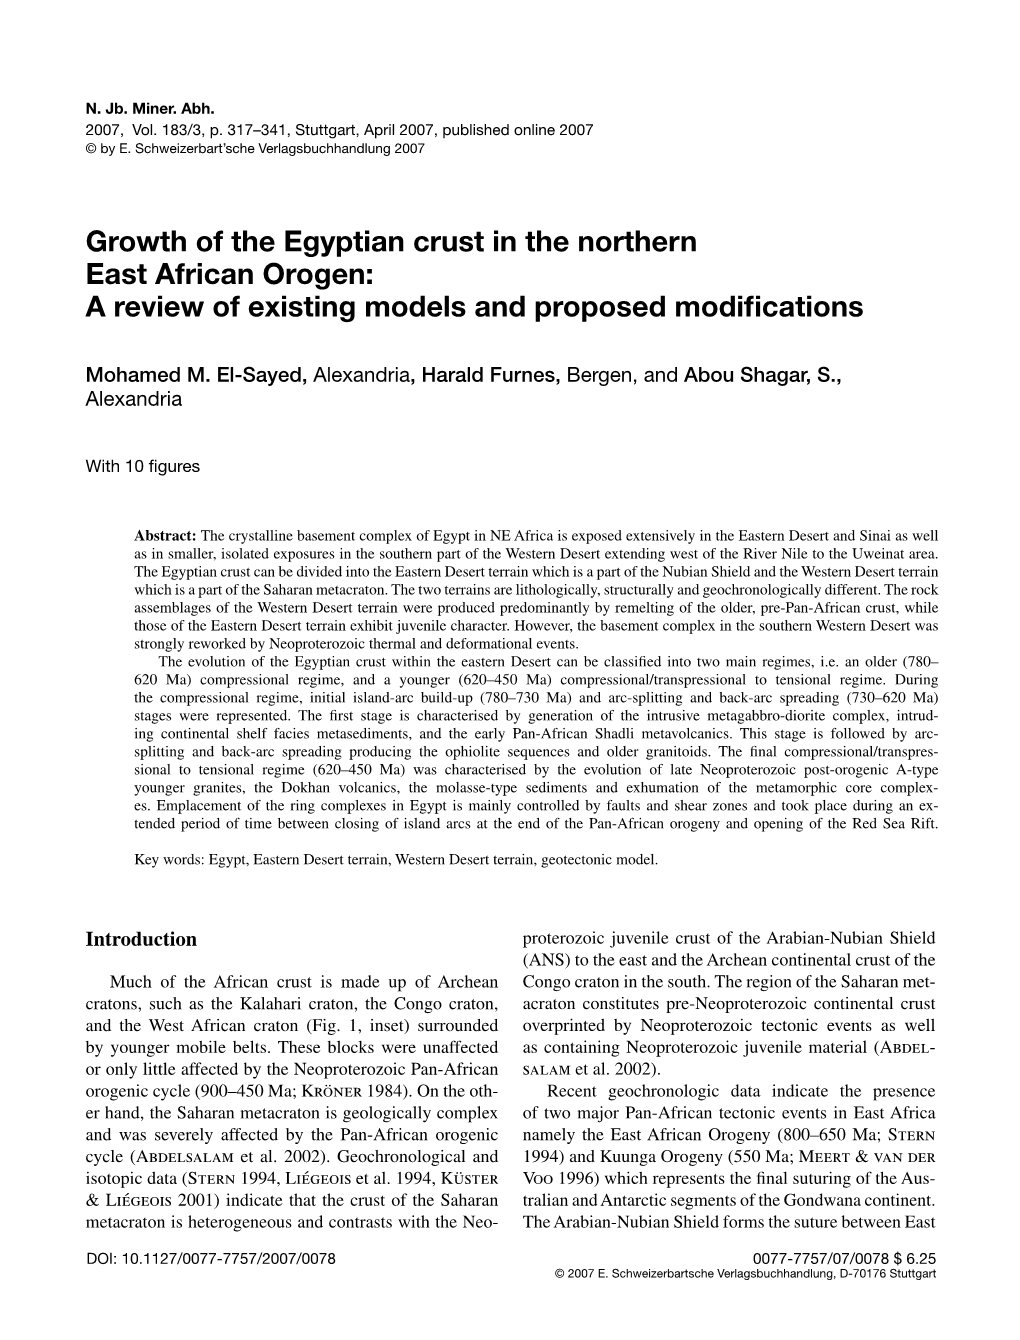 Growth of the Egyptian Crust in the Northern East African Orogen: a Review of Existing Models and Proposed Modiﬁ Cations